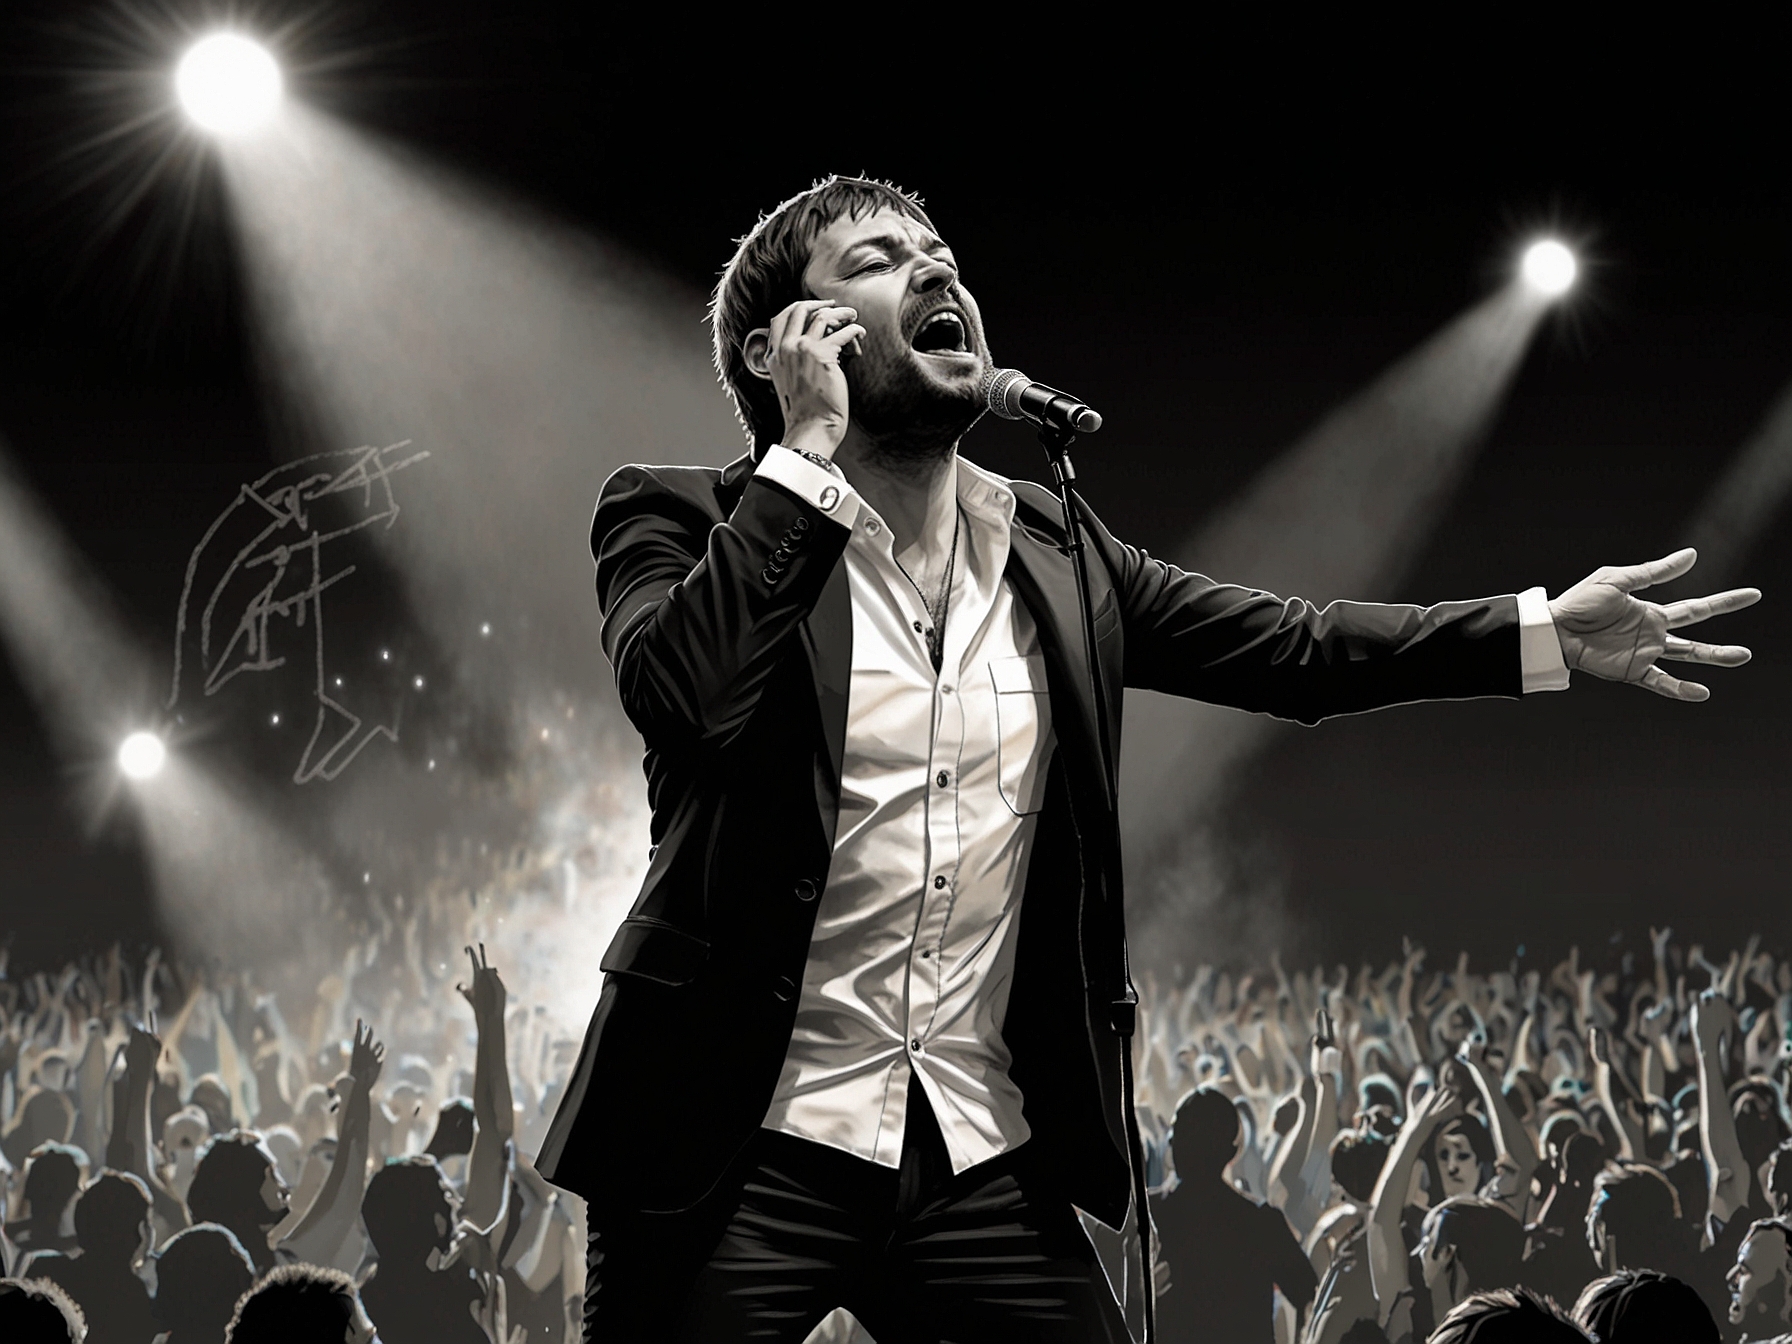 Tom Meighan during a high-energy Kasabian performance, capturing his once-charismatic stage presence before his career downfall and legal issues.